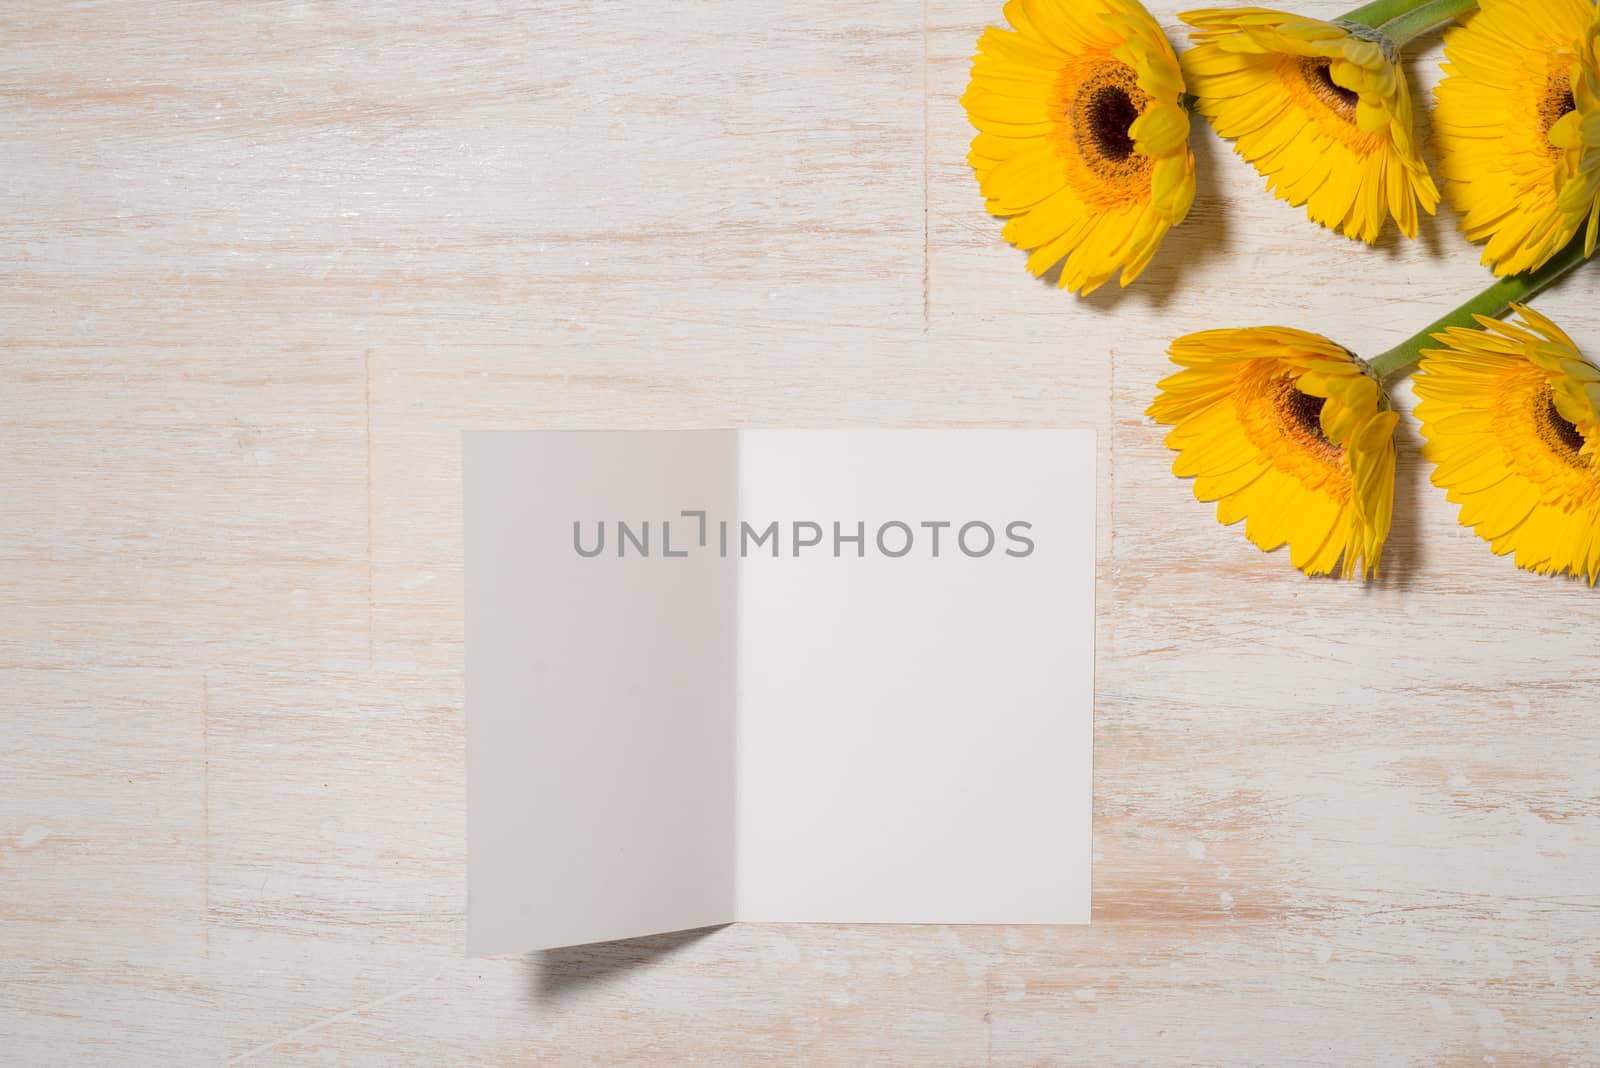 Greeting card with yellow flowers over wooden background. Top view with copy space